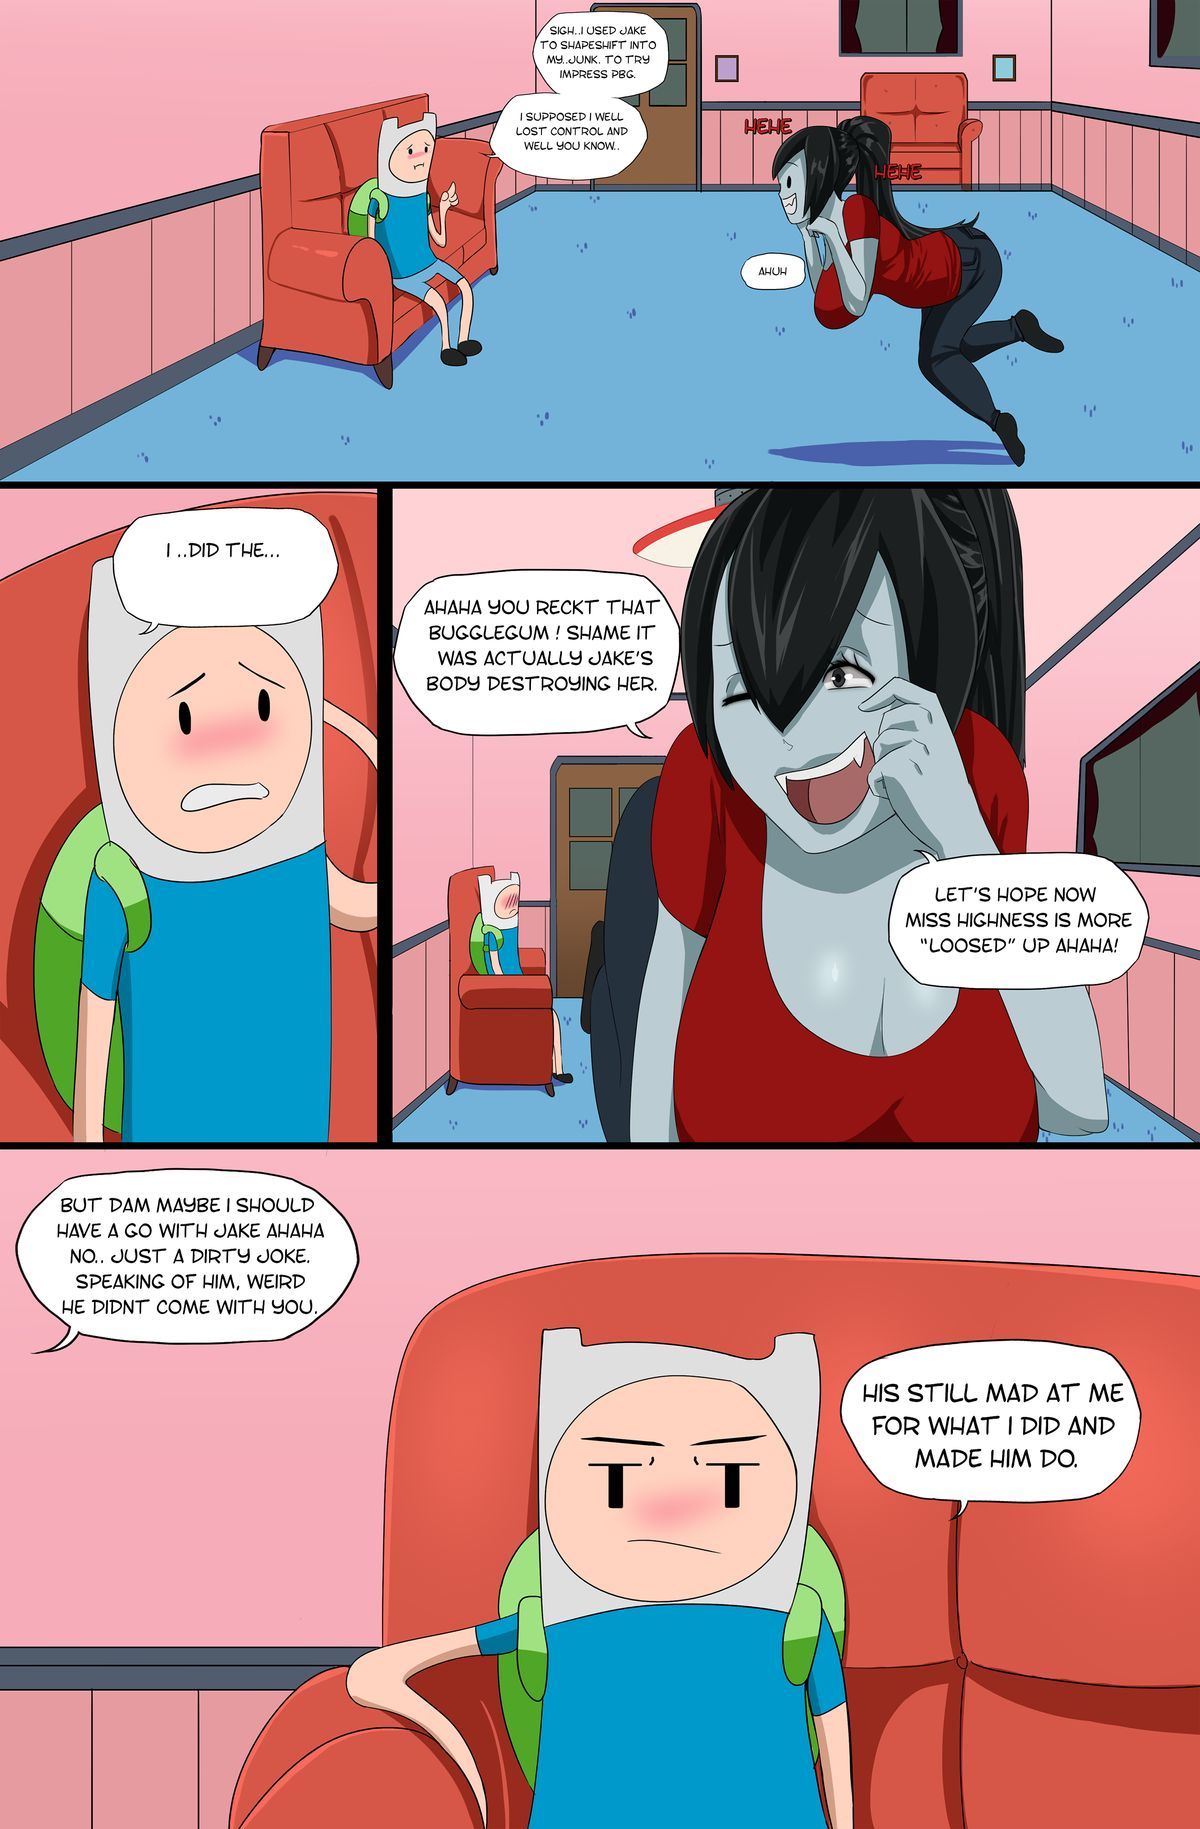 [Dipdoodle]_Adventure_Time_-_Desire_For_the_Color_Lust comix_59879.jpg